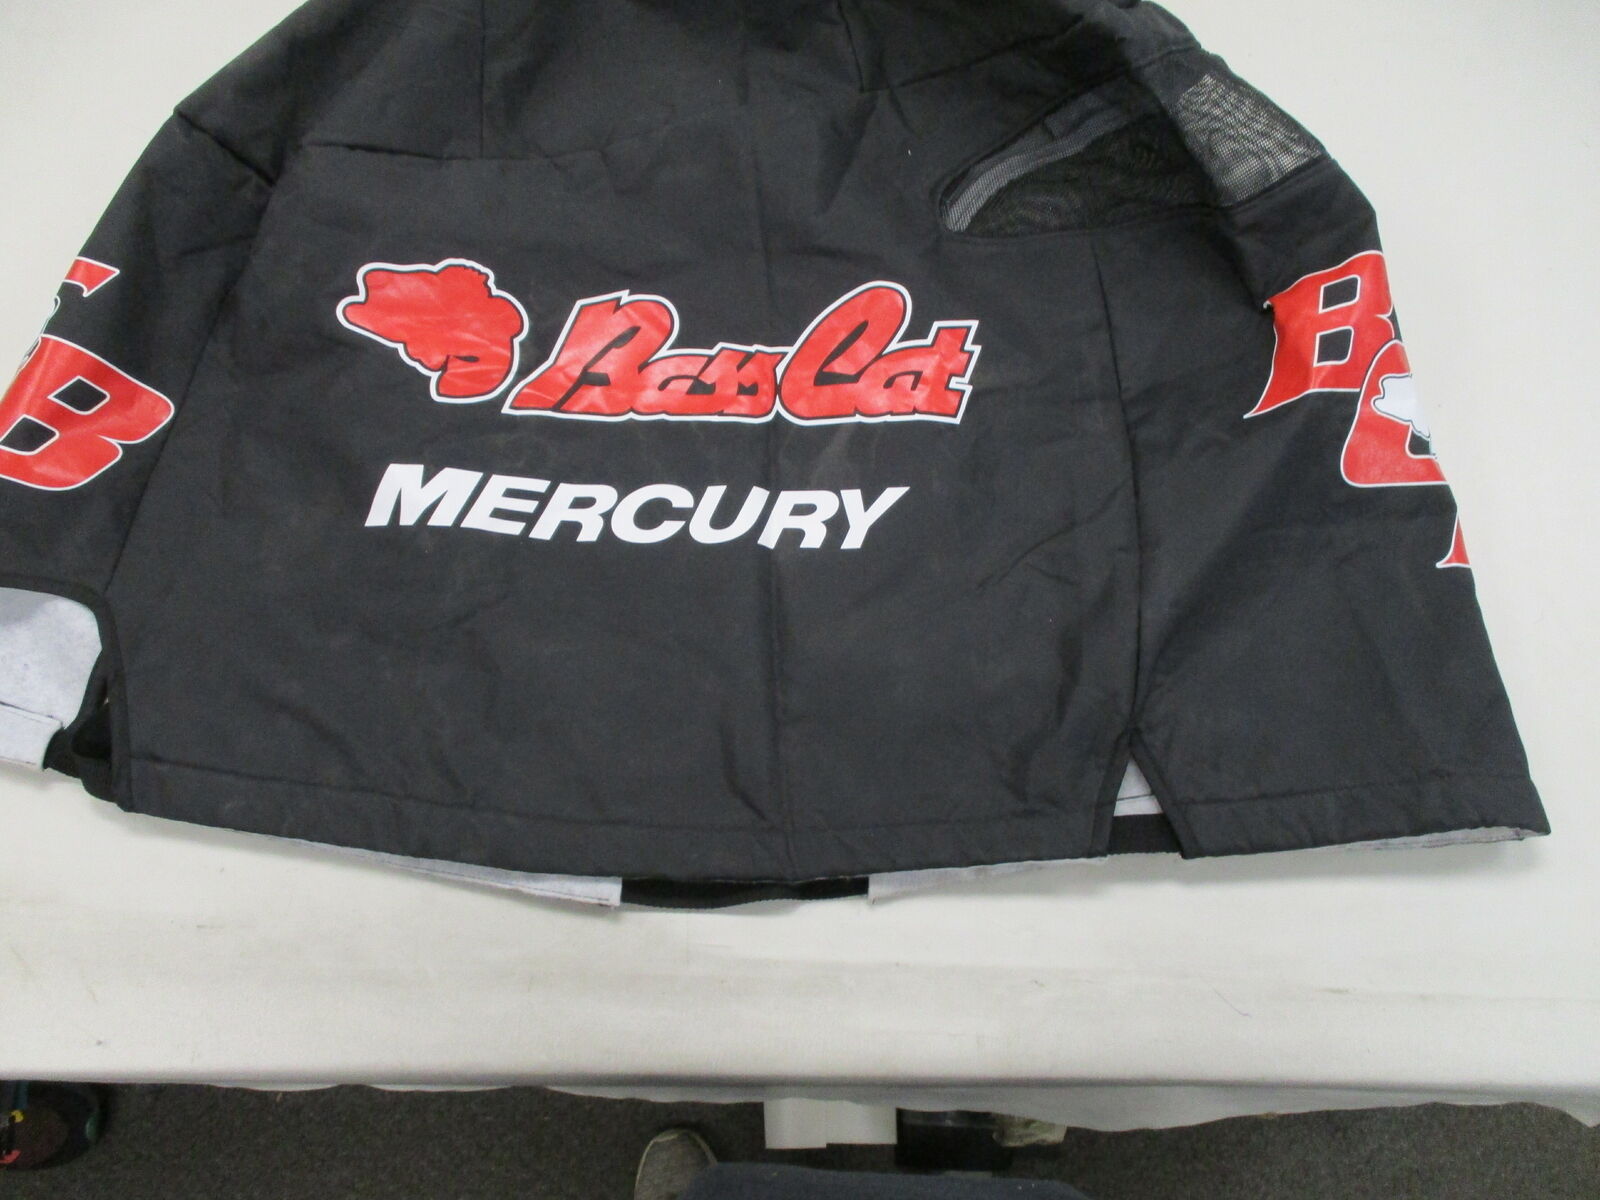 BASS CAT MERCURY OUTBOARD MOTOR HEAD COVER BLACK / RED / WHITE MARINE BOAT